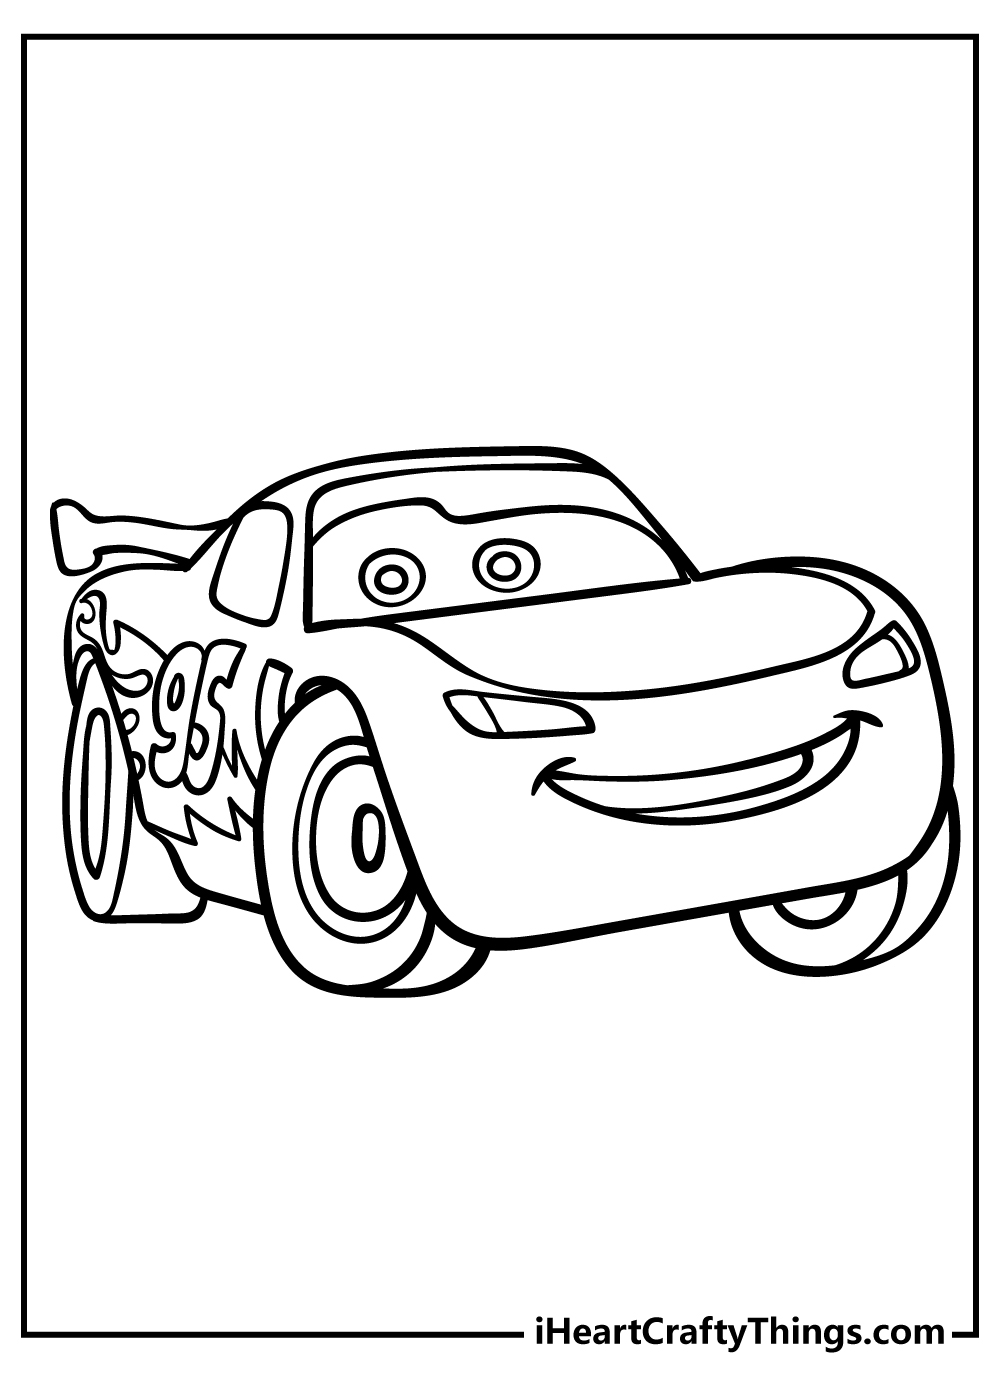 Printable Lightning McQueen Coloring Pages Updated 20 - Otakugadgets